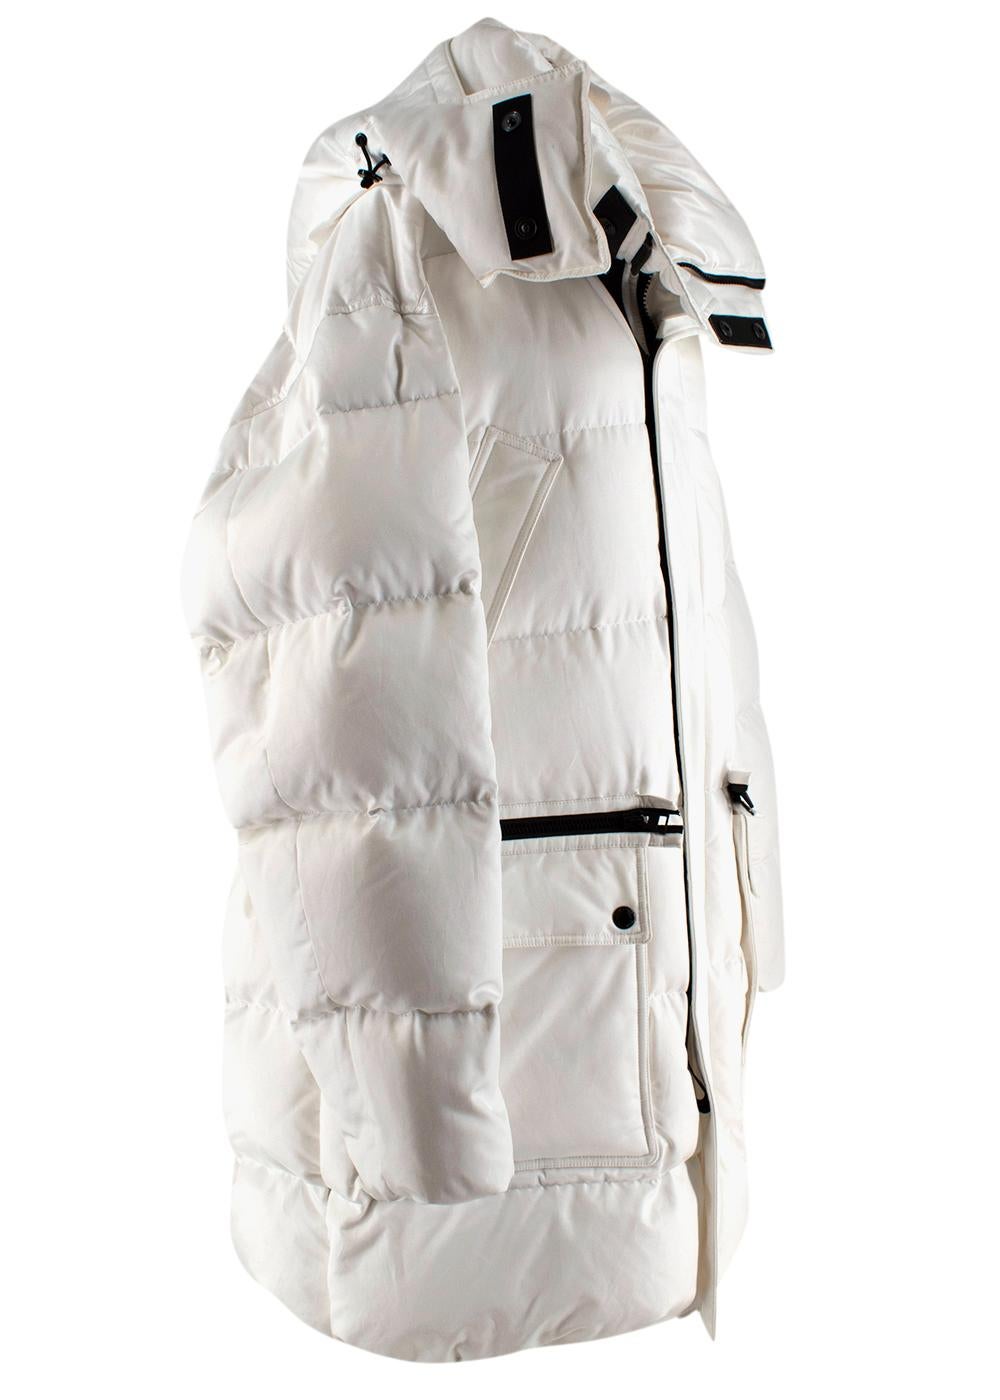 Tom Ford White Oversized Puffer Jacket

- Longline
- Heavy weight
- Detachable hood with zip opening
- Inner and outer pockets
- Leather logo detail over pocket
- Zip and press stud fastening
- Elasticated hem and cuffs

Materials

Outer
63%